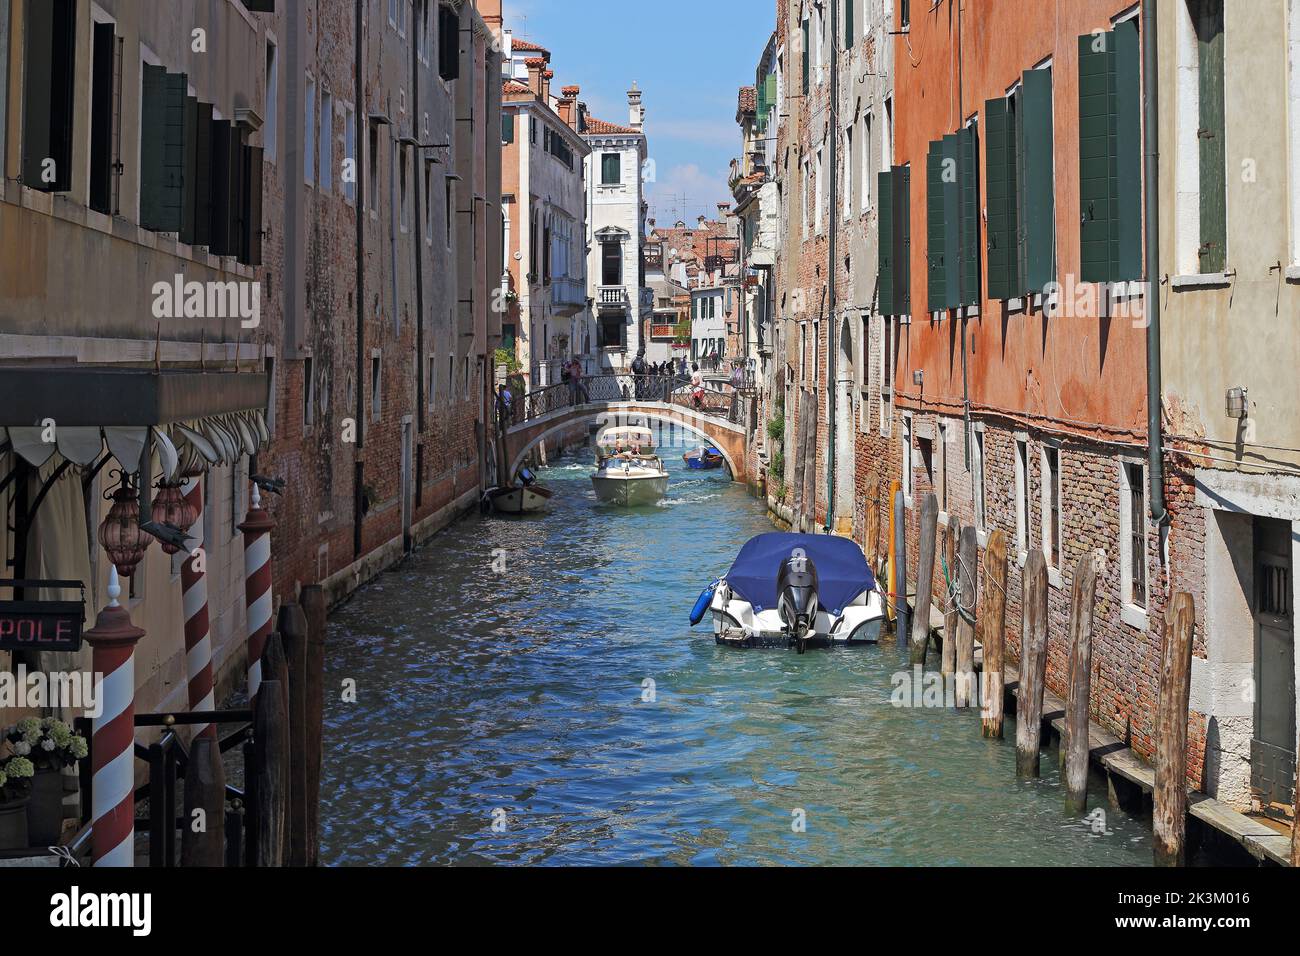 VENICE, ITALY - MAY 18, 2018: This is one of the inner city canals of the famous Italian on air city-museum. Stock Photo